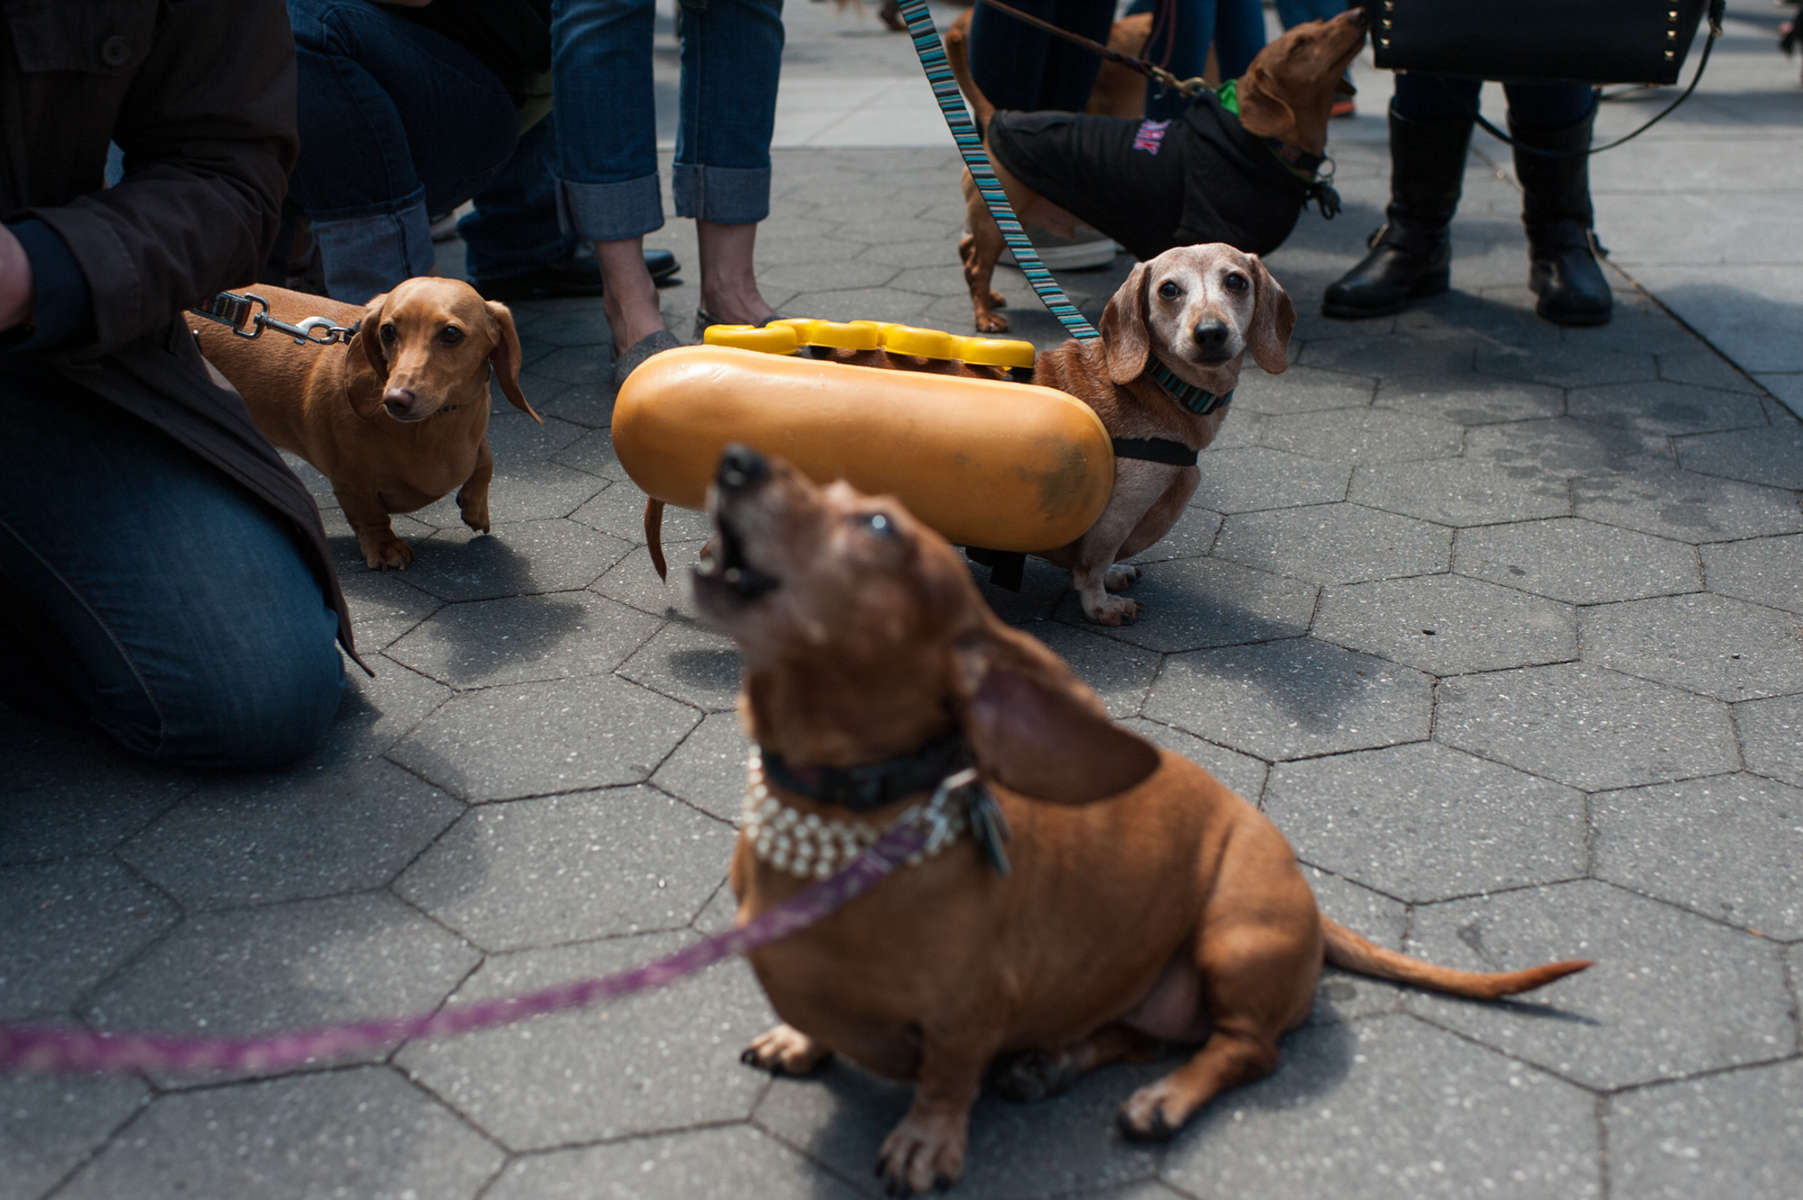 Stella, a thirteen-year-old Dachshund, makes a statement in her hot-dog costume at the Dachshund Friendship Club Spring Fiesta in Washington Square Park. (Apr. 26, 2014)Photo by Nancy Borowick